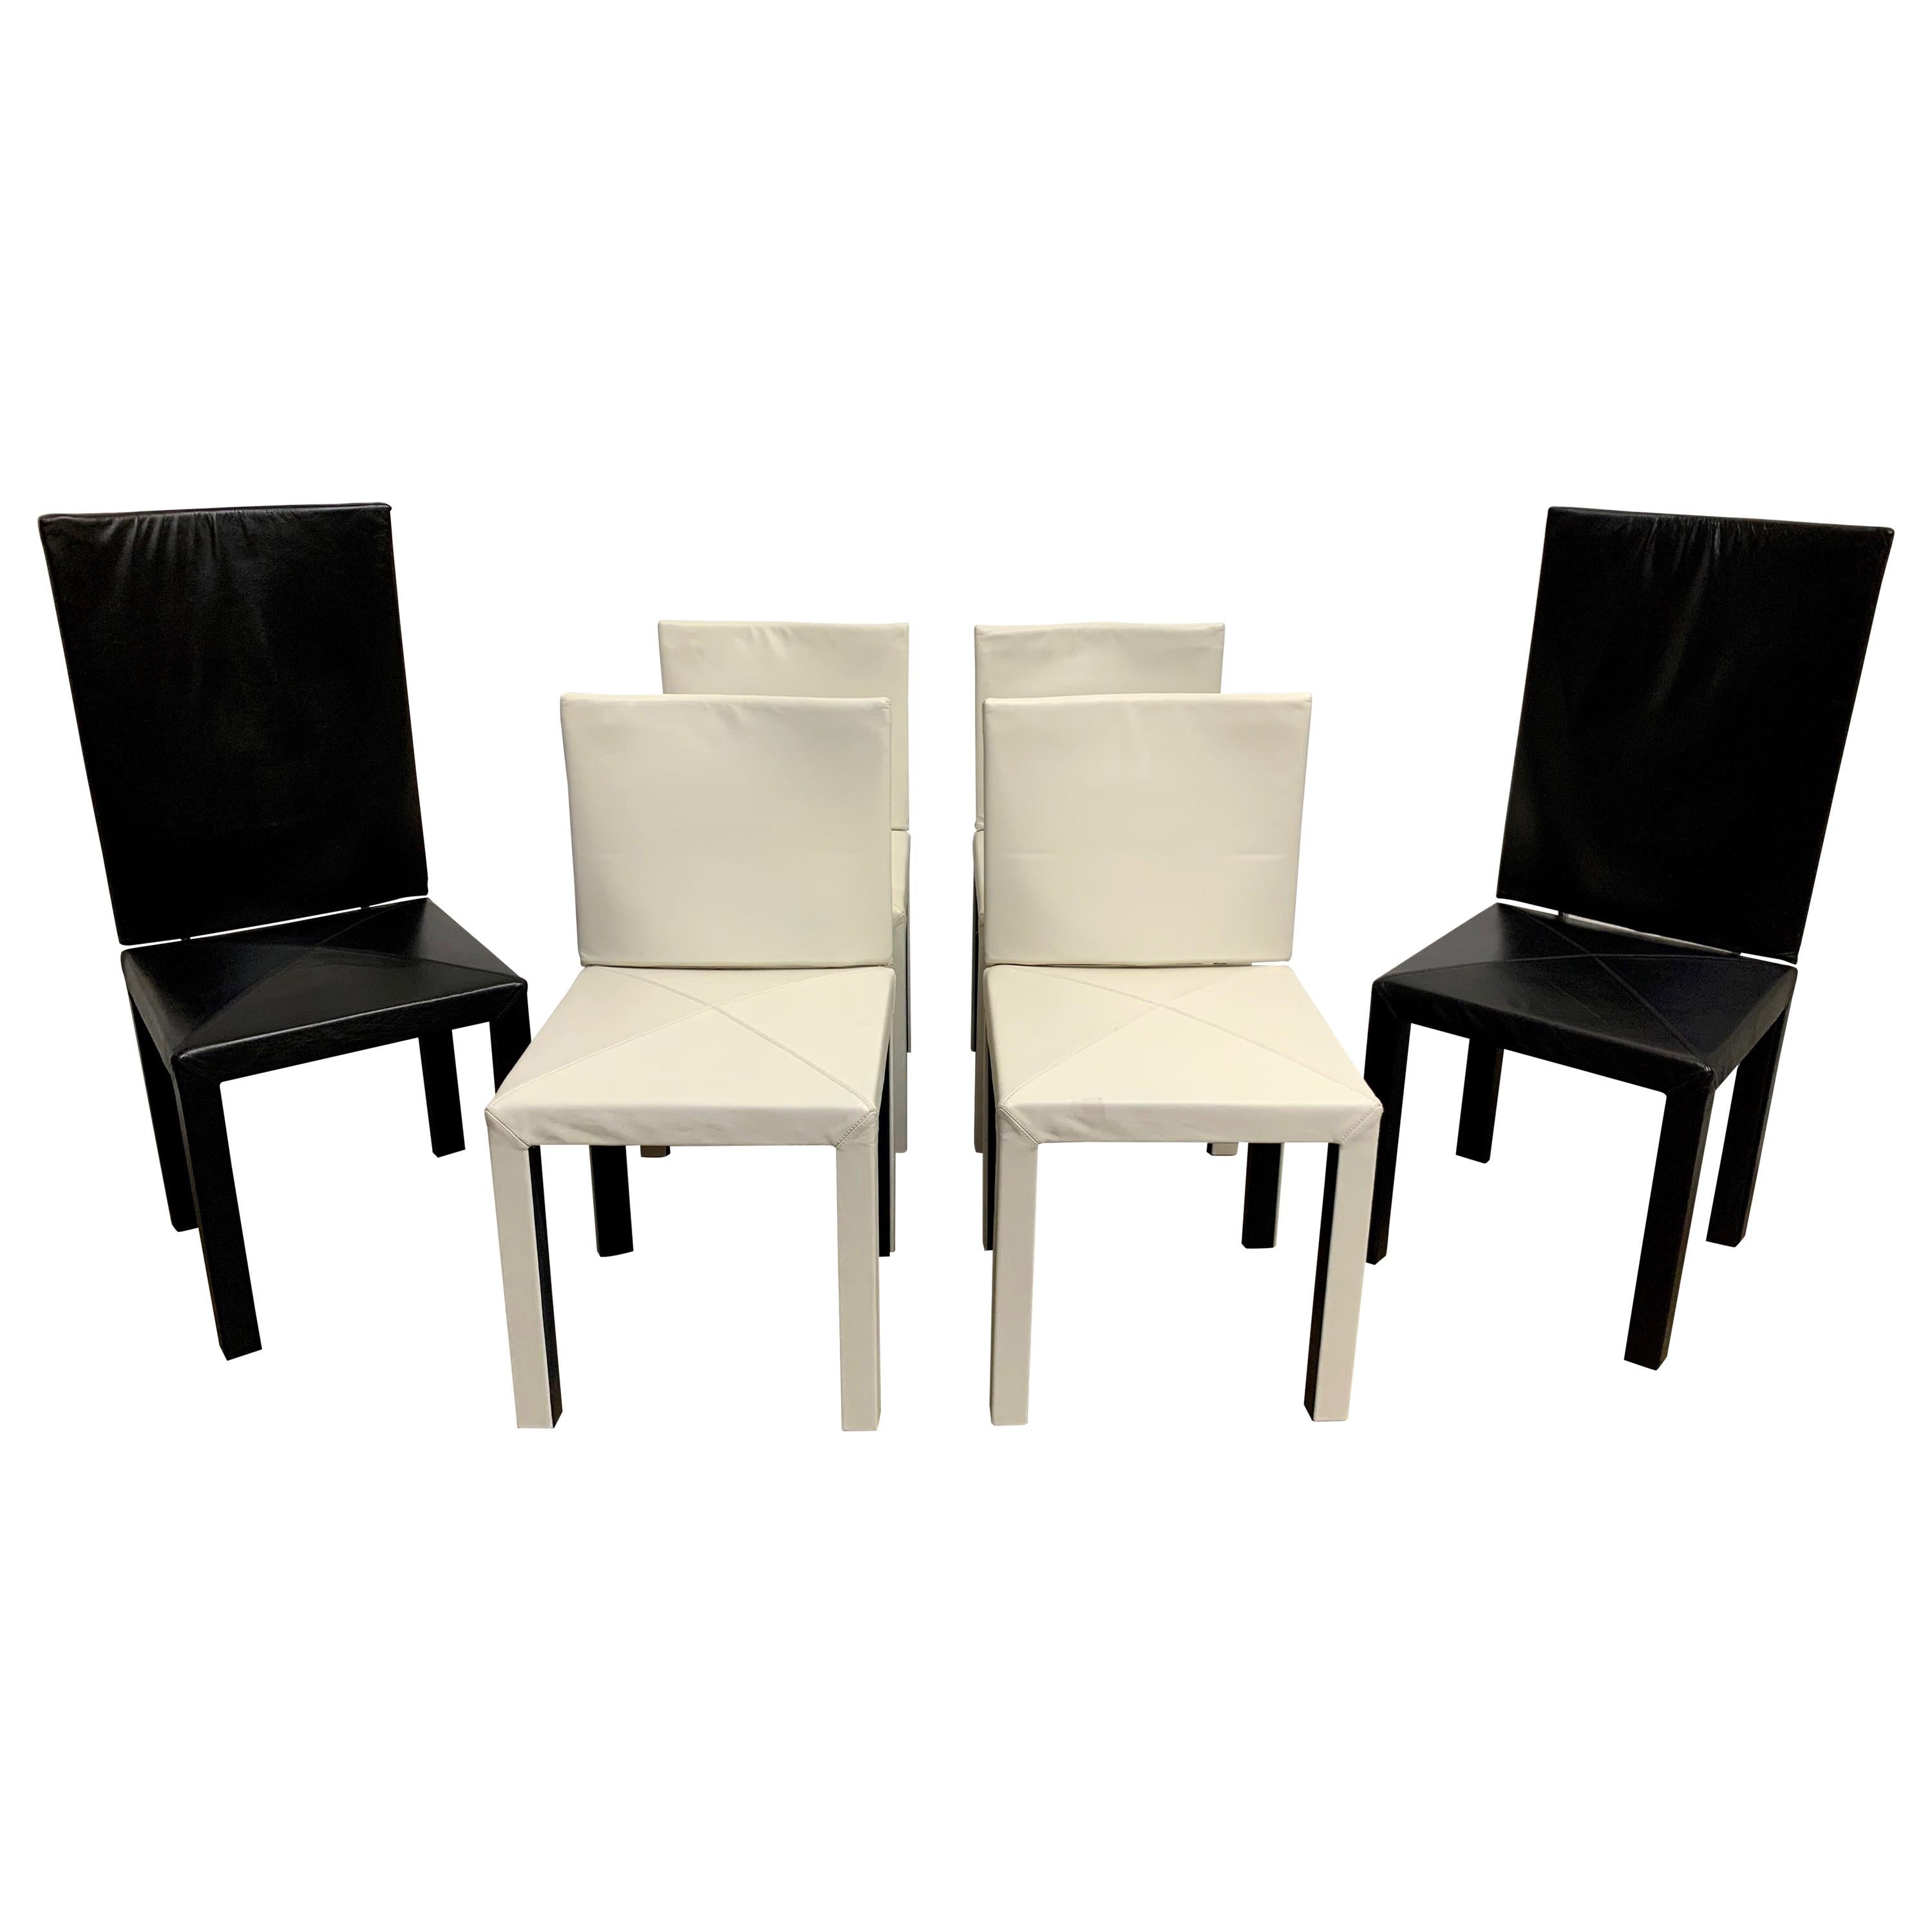 Paolo Piva Arcadia Leather Dining Chairs for B&B Italia